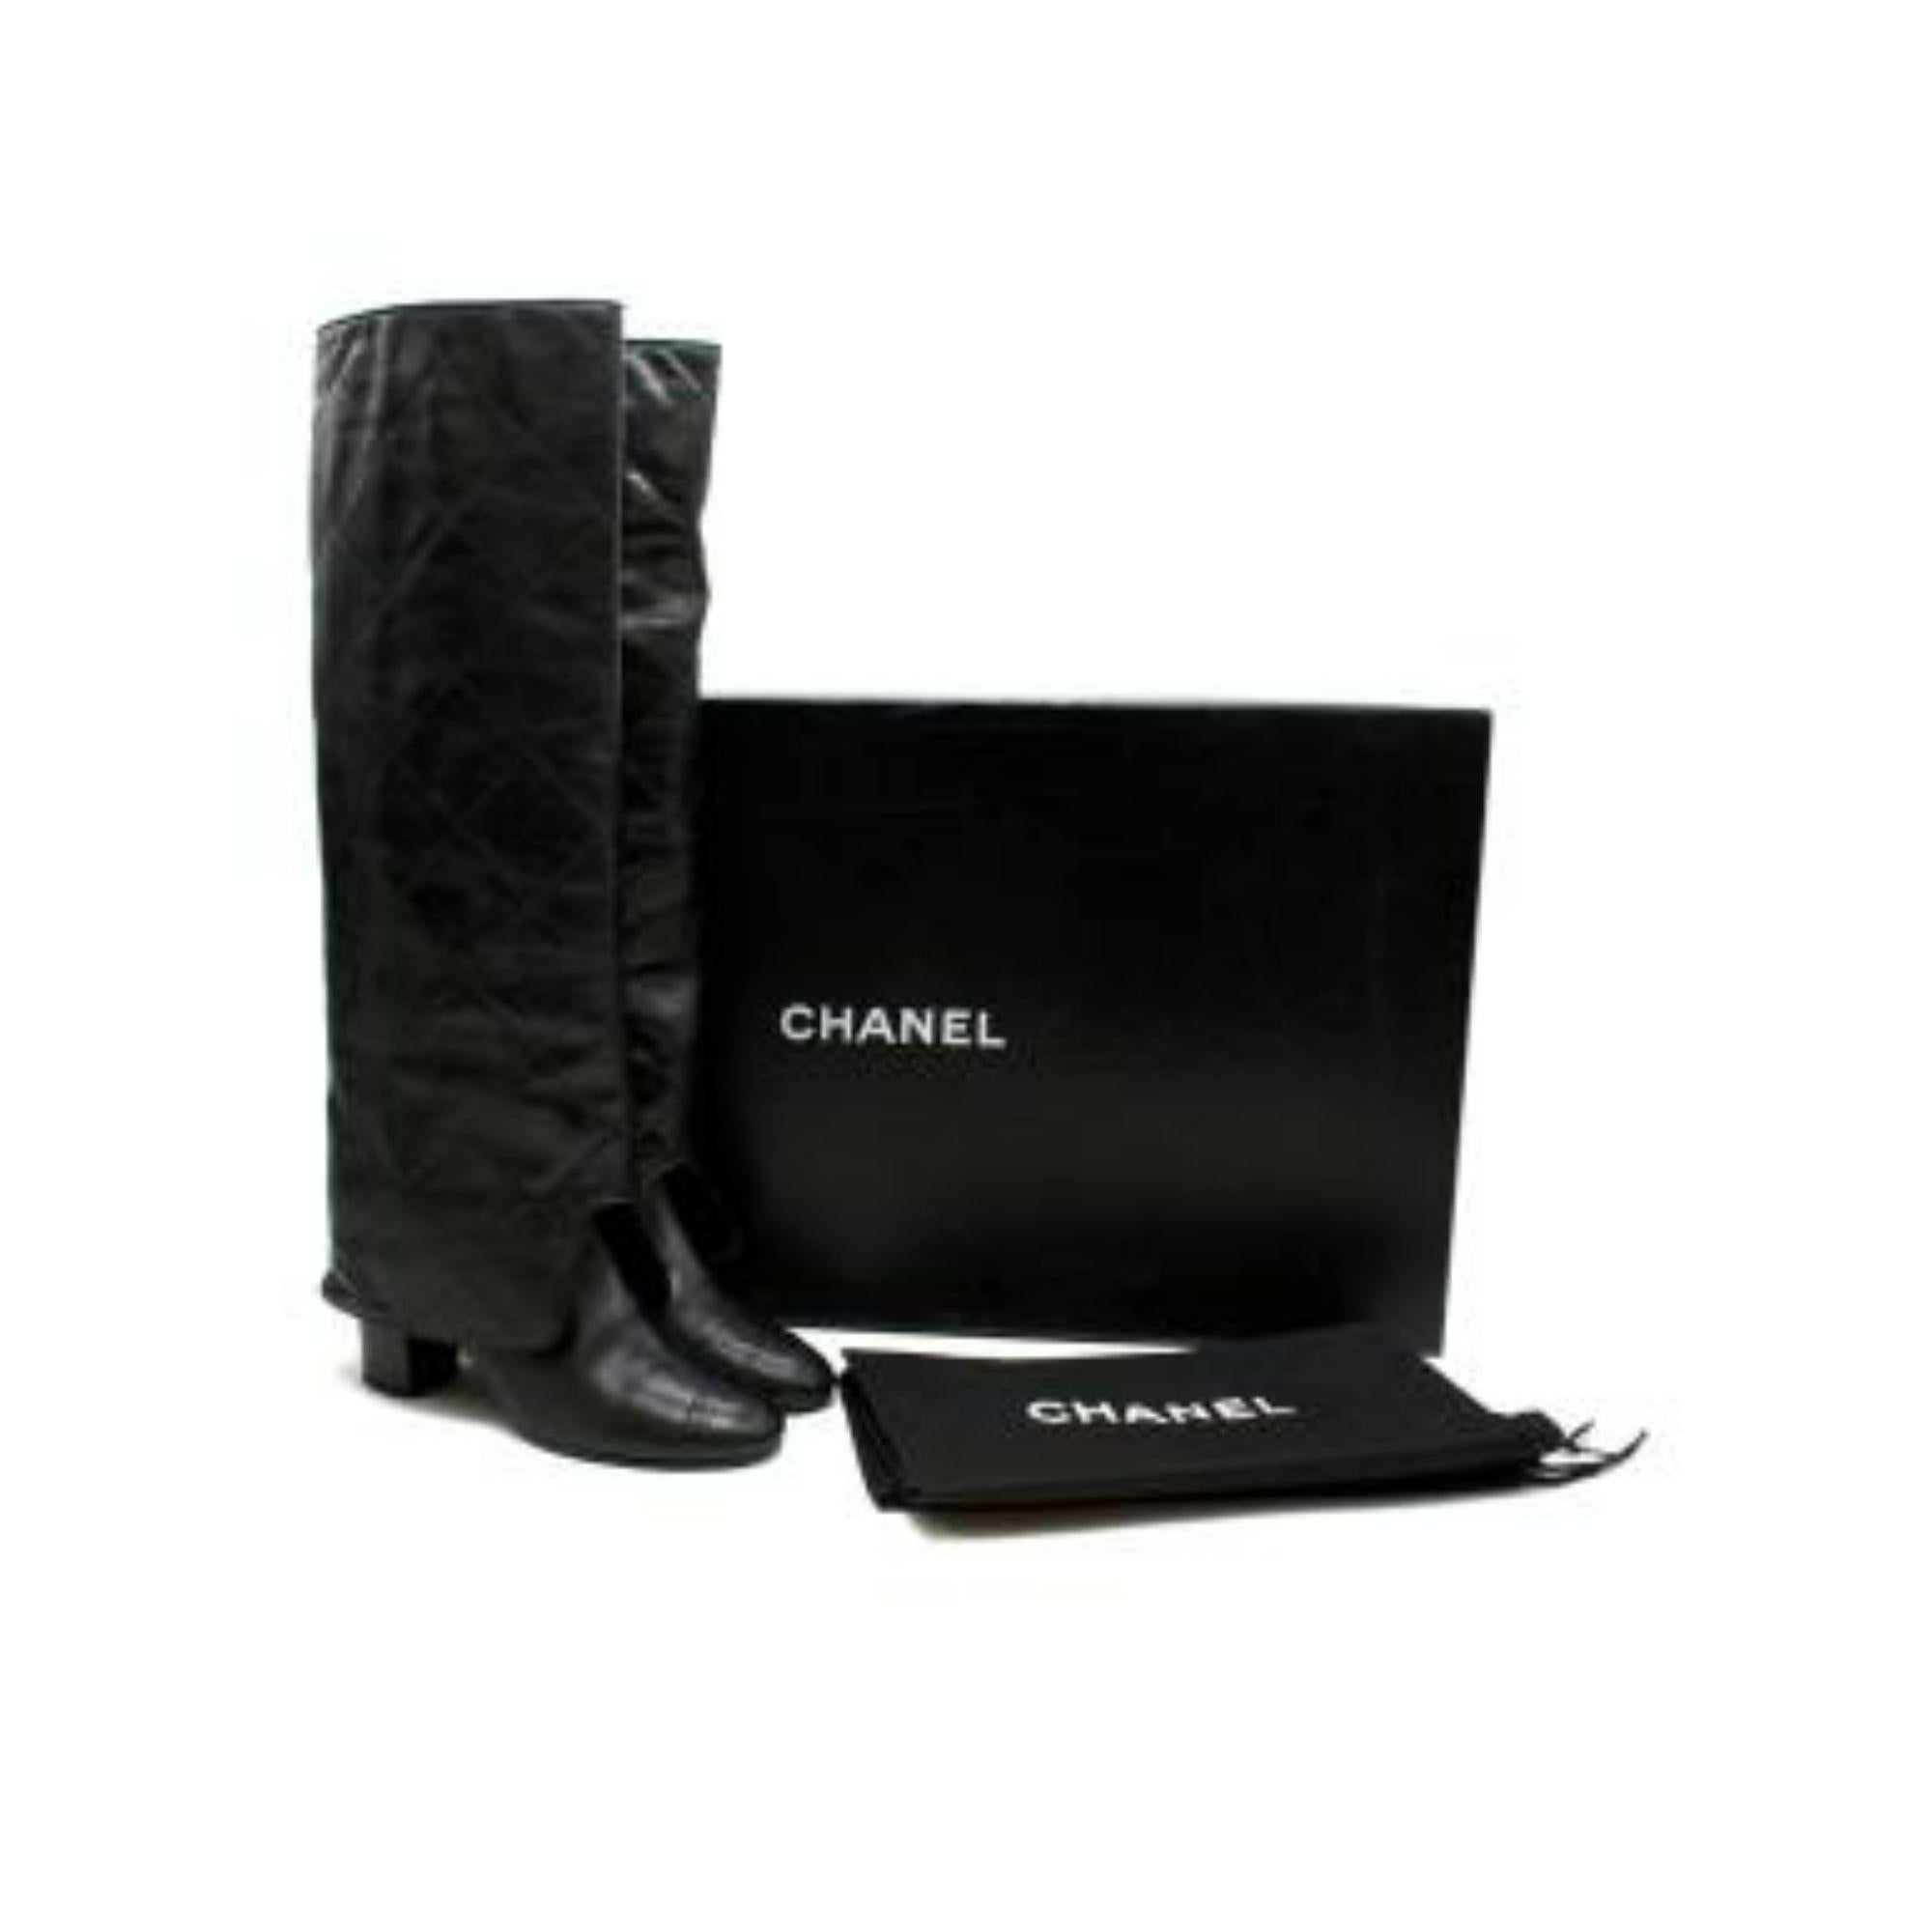 Chanel Black Quilted Leather Knee-high Boots

- Round toe
- Block heel
- Quilted body
- Signature CC logo on heel
- Knee-high

Material
Leather

Made in Italy

9.5/10 Excellent condition

PLEASE NOTE, THESE ITEMS ARE PRE-OWNED AND MAY SHOW SIGNS OF